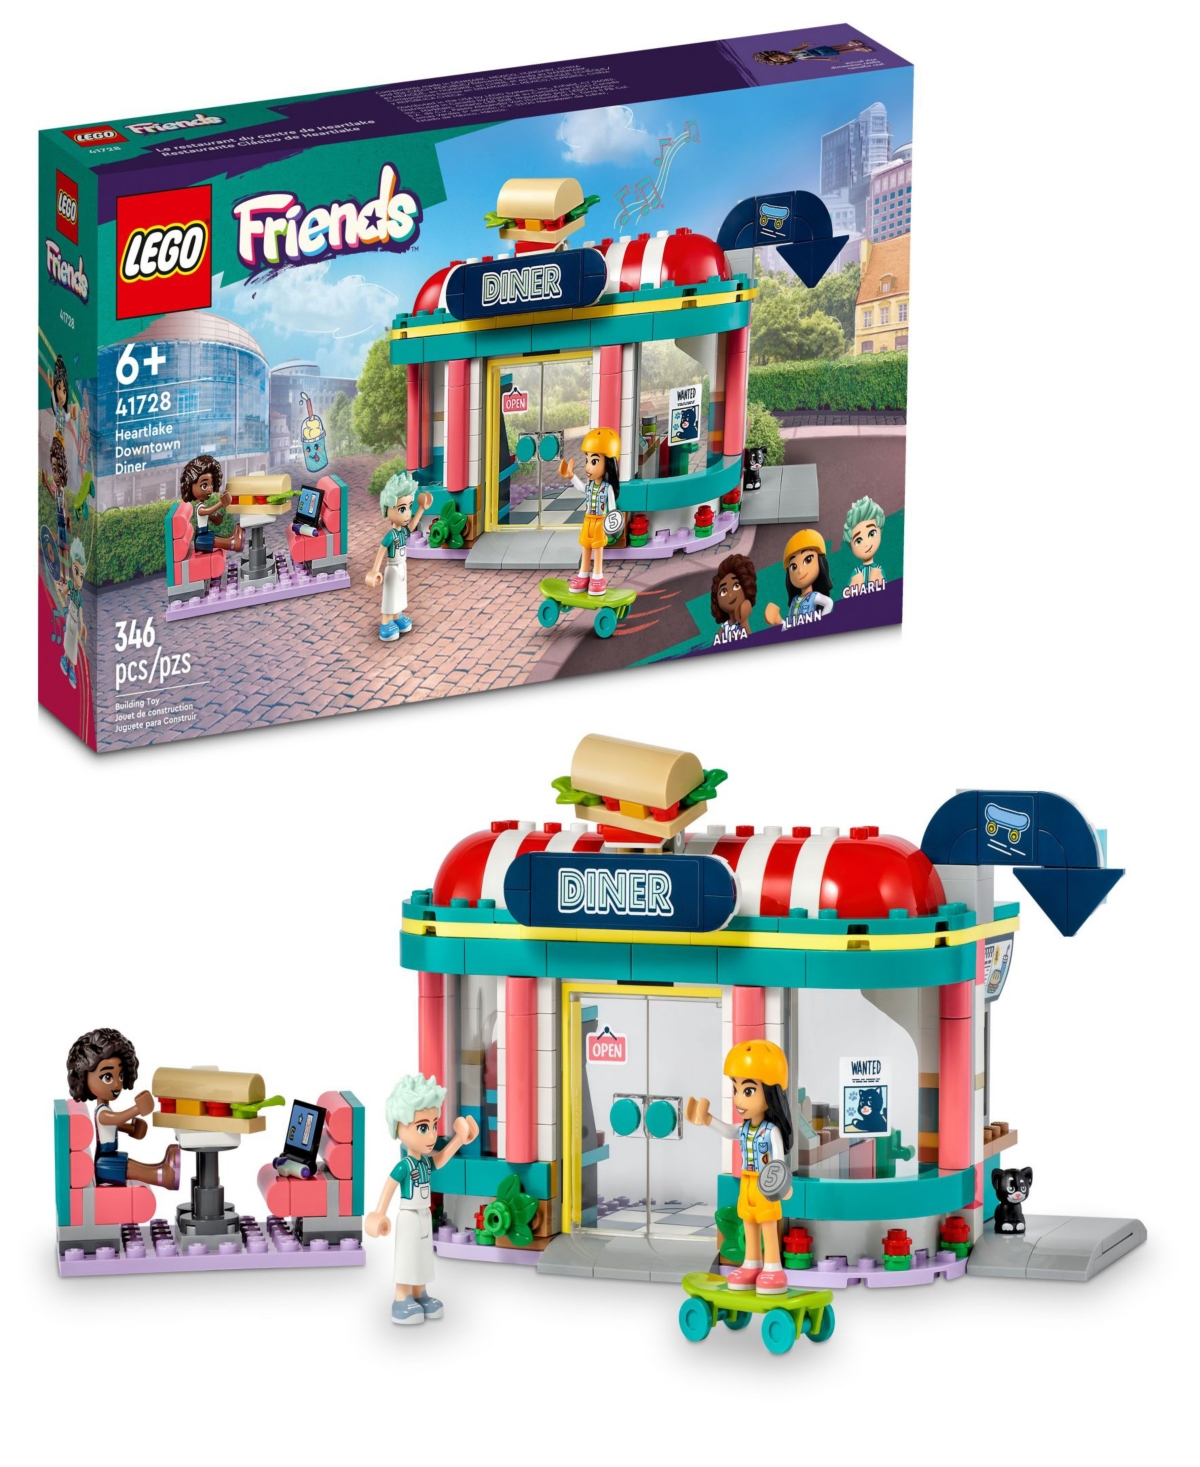 Lego Friends Heartlake Downtown Diner 41728 Toy Building Set With Liann, Aliya And Charli Figures In Multicolor